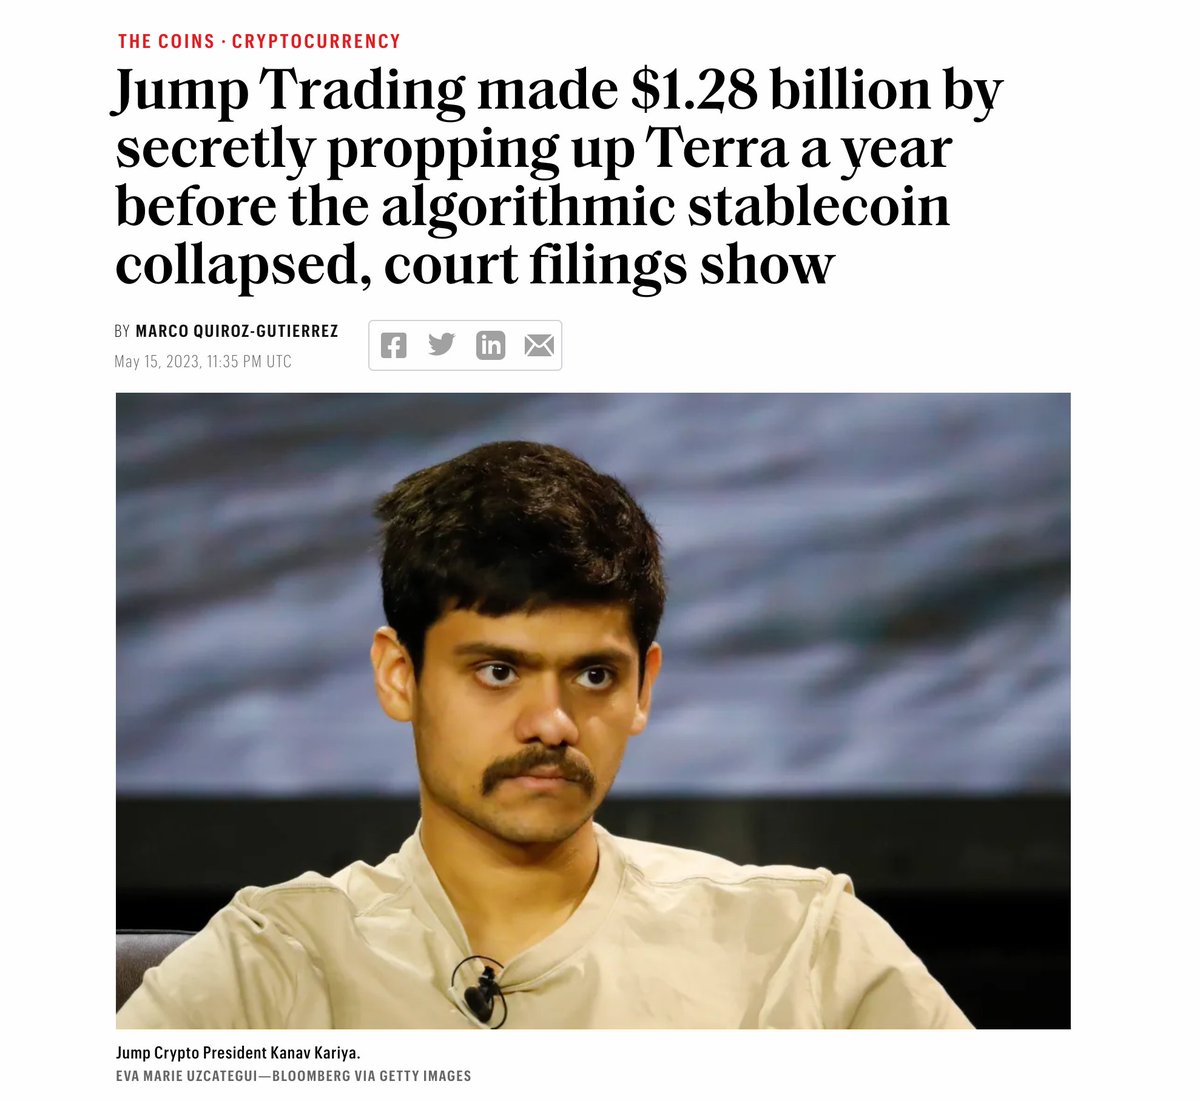 The crypto space is filled with wolves in sheep's clothing Do Kwon (@stablekwon) tried to argue that natural market forces was the reason for the @terra_money $UST repeg in May 2021, a full year before its collapse In reality, it was secretly propped up via an undisclosed deal…